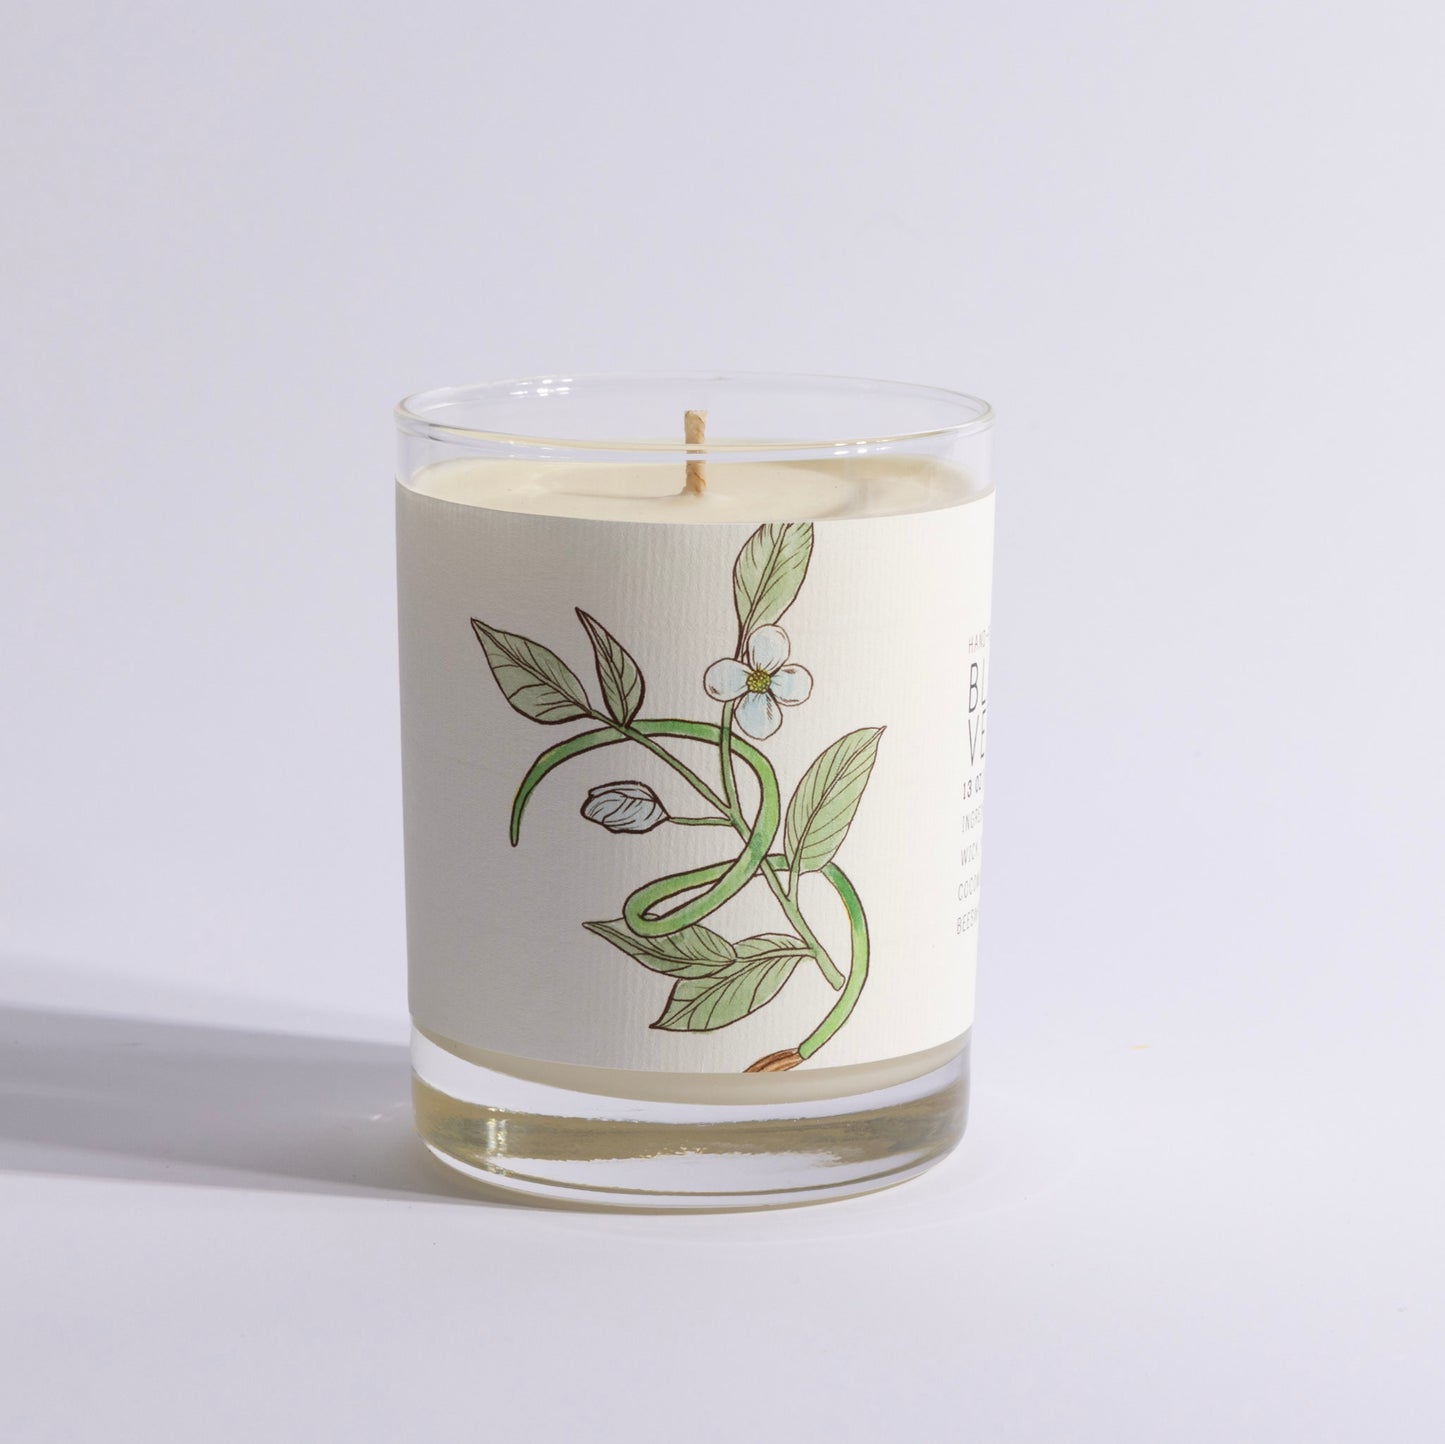 Black Tea Vetiver - Just Bee Candles